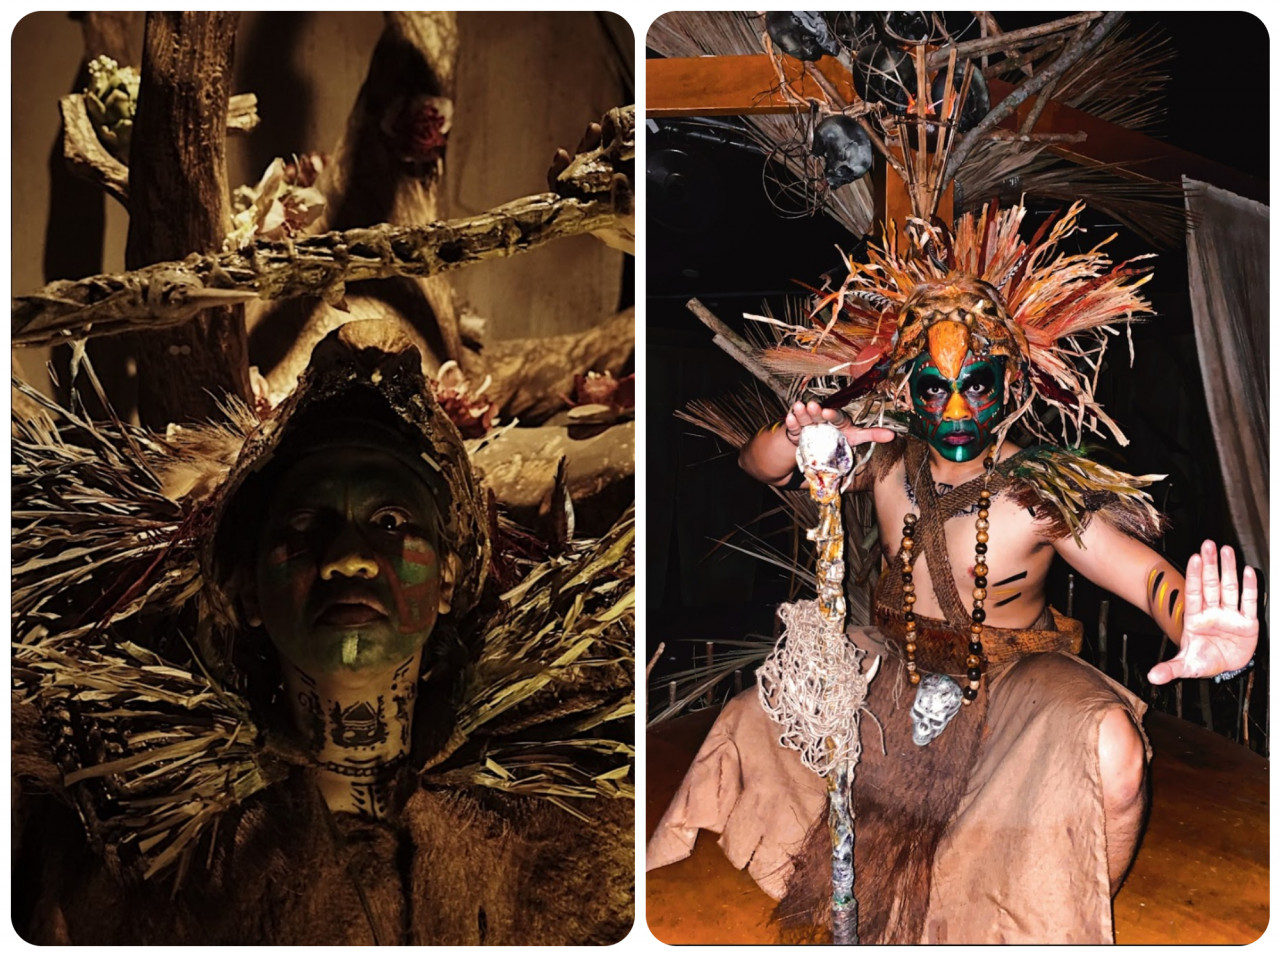 The make-up and costuming for the villagers and their chiefs helped inform the performances and bring the characters to life. – Pics courtesy of Hauntu